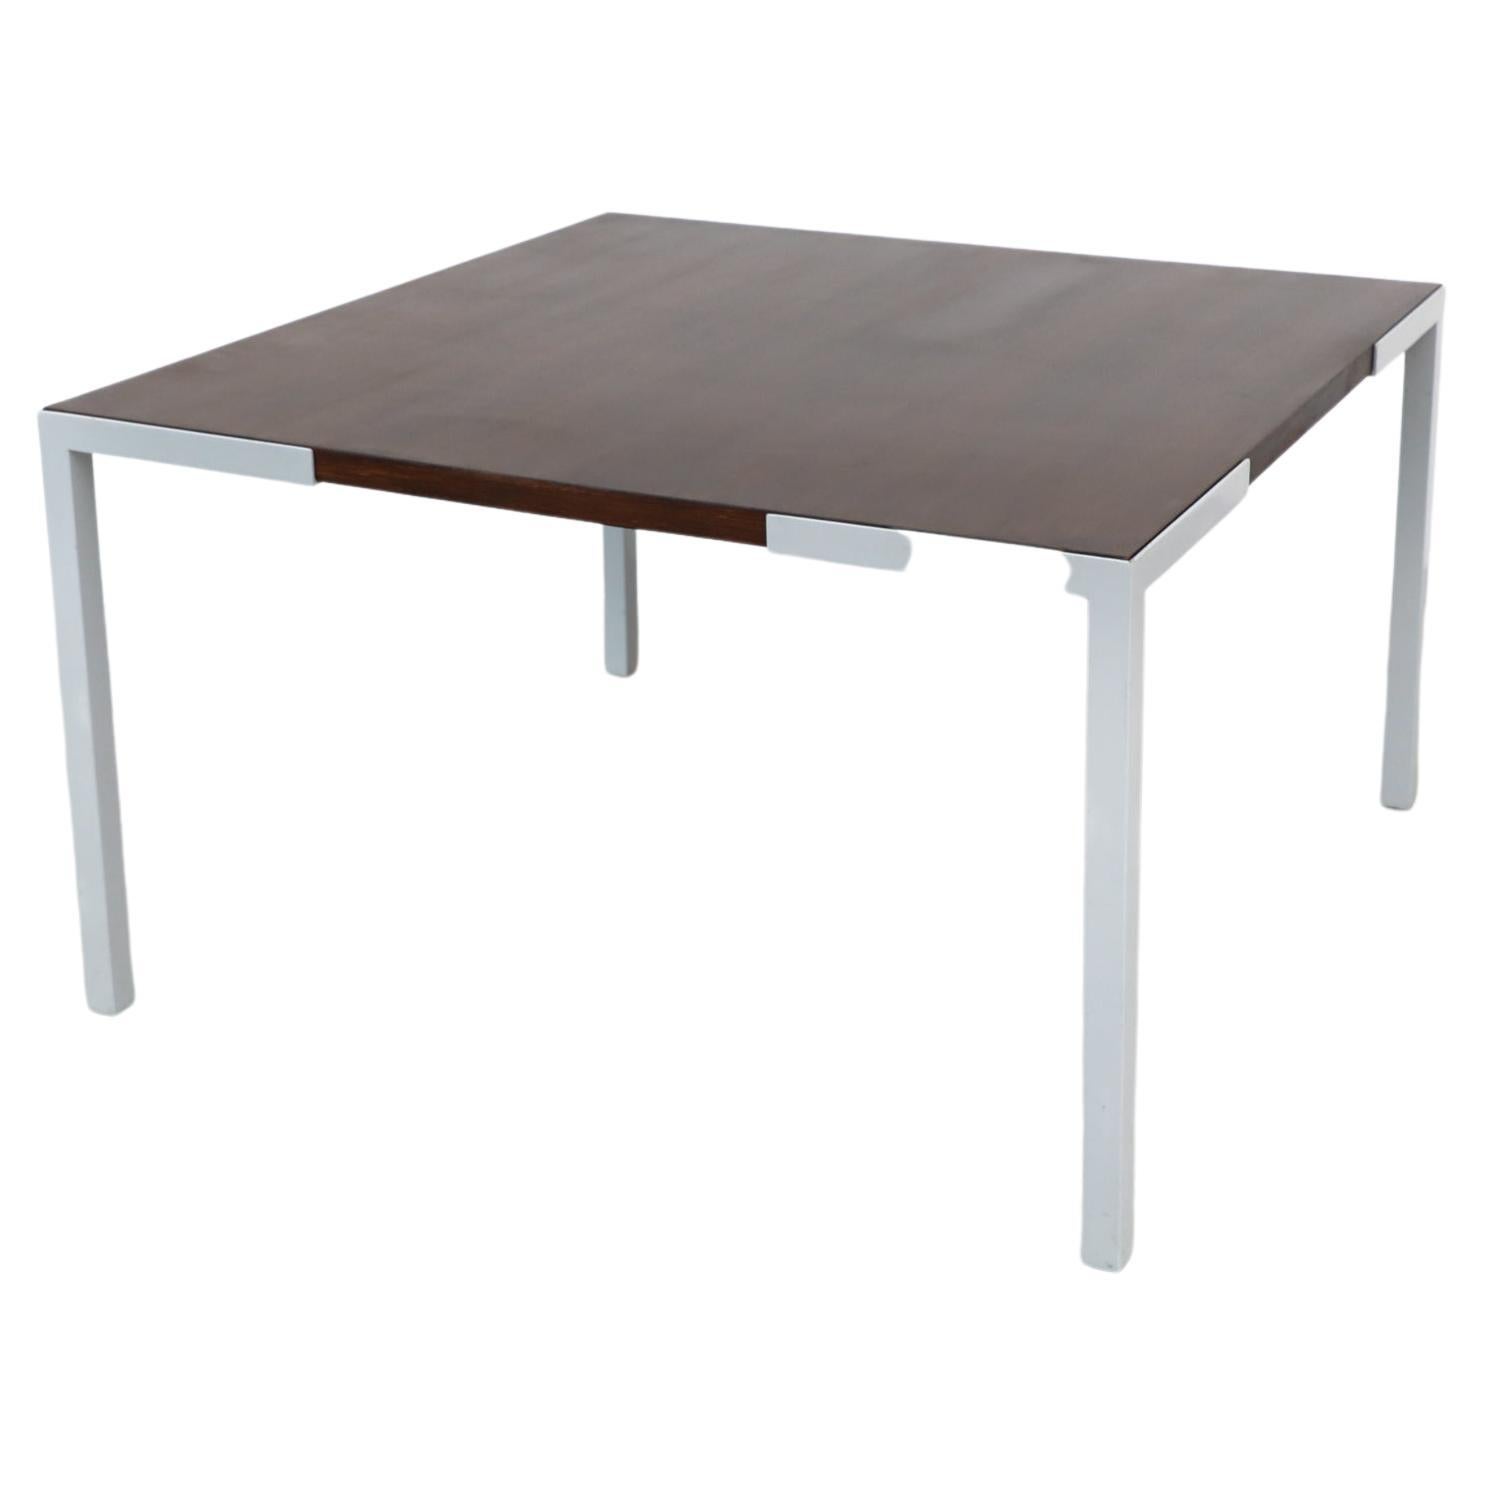 Simple, austere Wim den Boon square square dining table with wenge top and enameled metal legs. The wenge top is inset in the enameled steel leg frames. In good condition with visible wear, including some scratches.